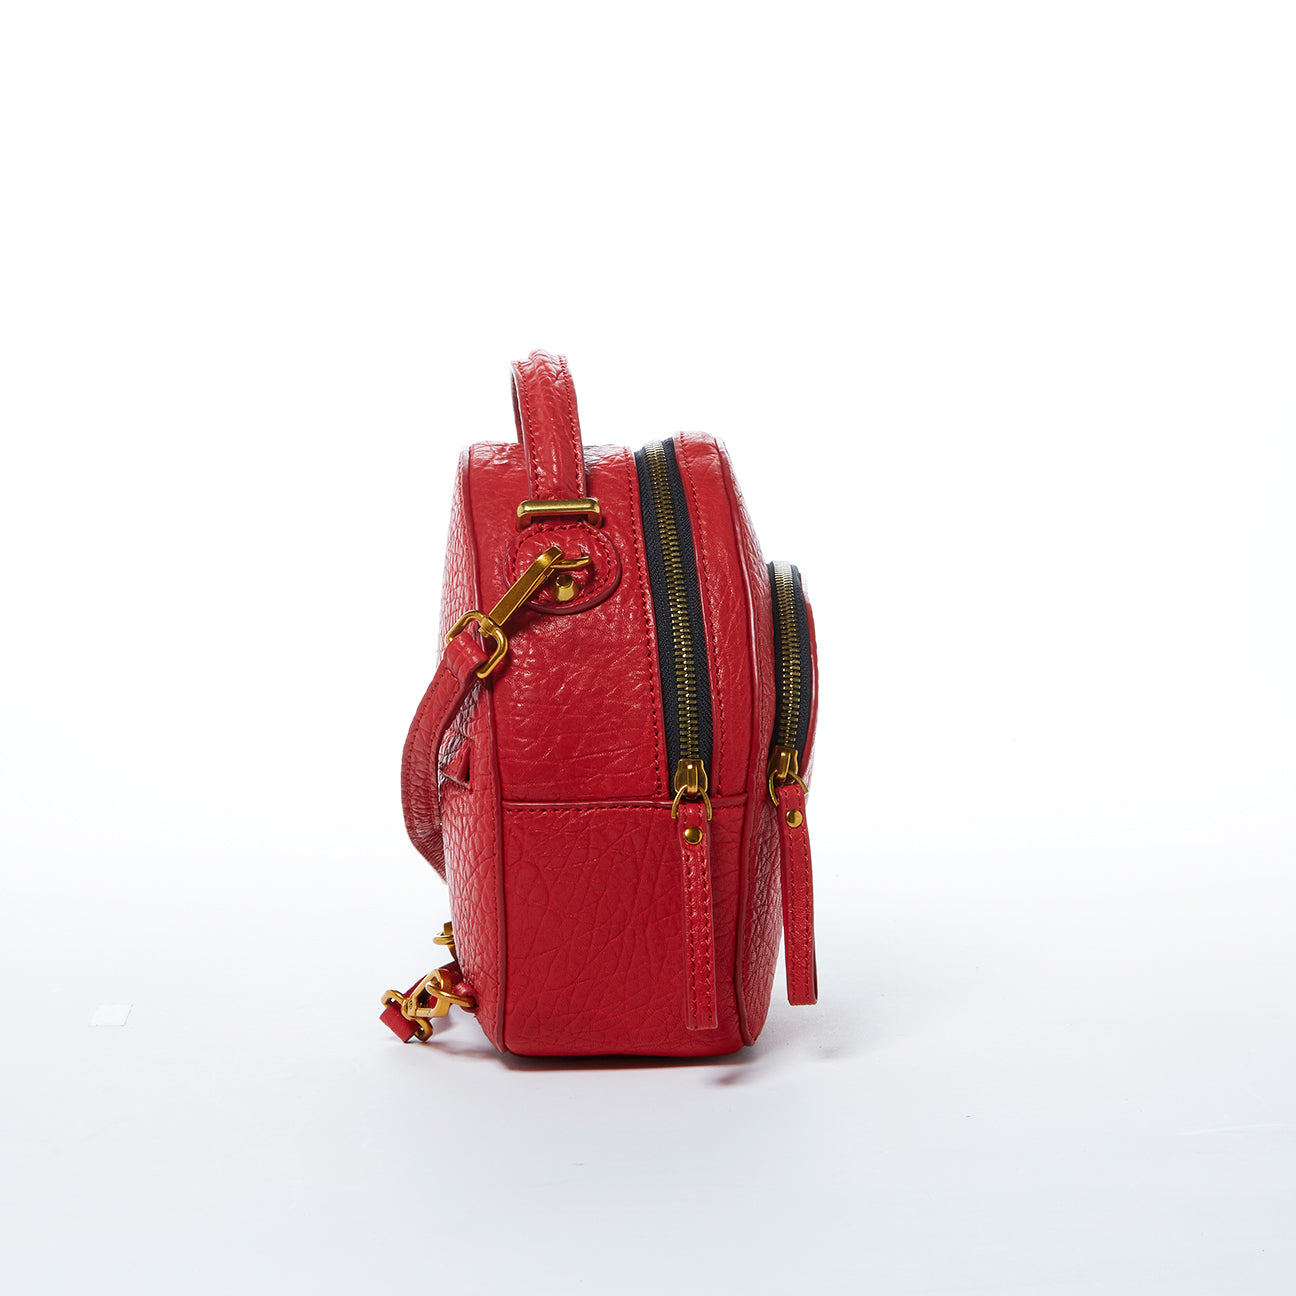 Convertible Backpack Purse